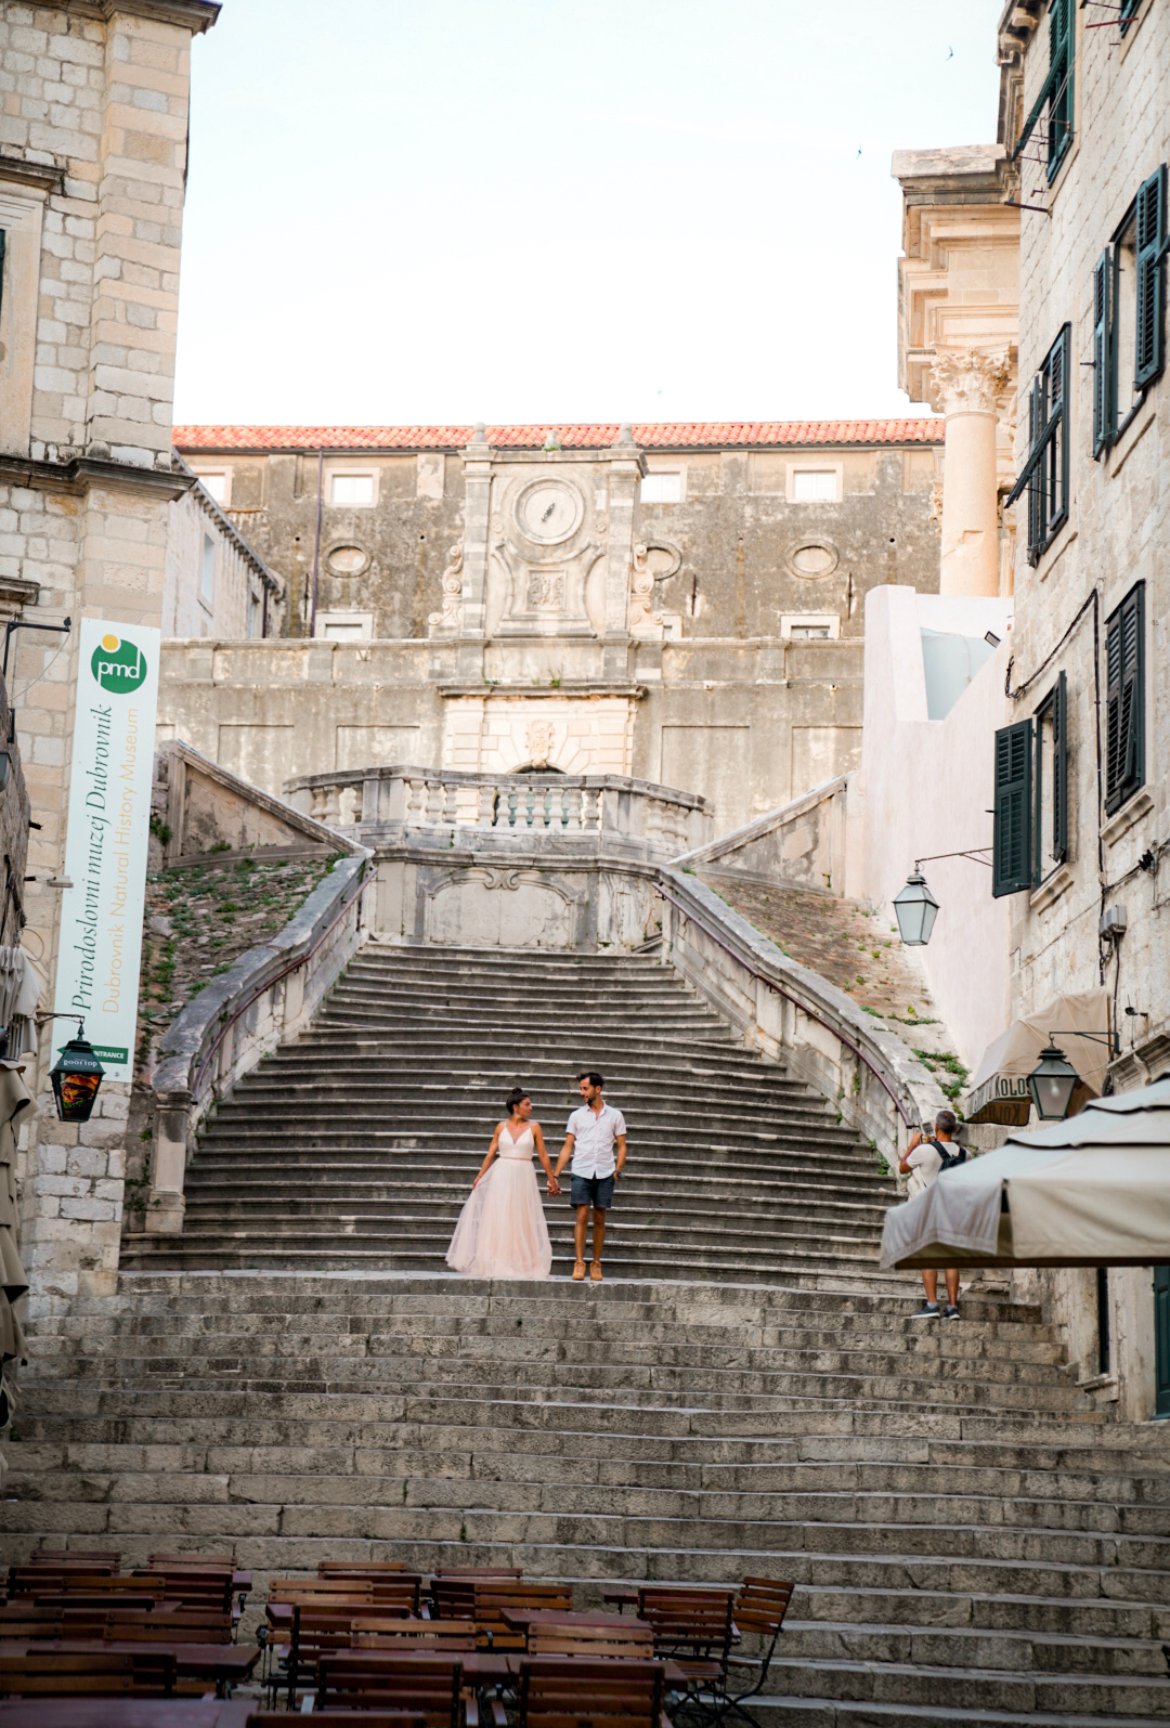 Jesuit Stairs, things to do in Dubrovnik